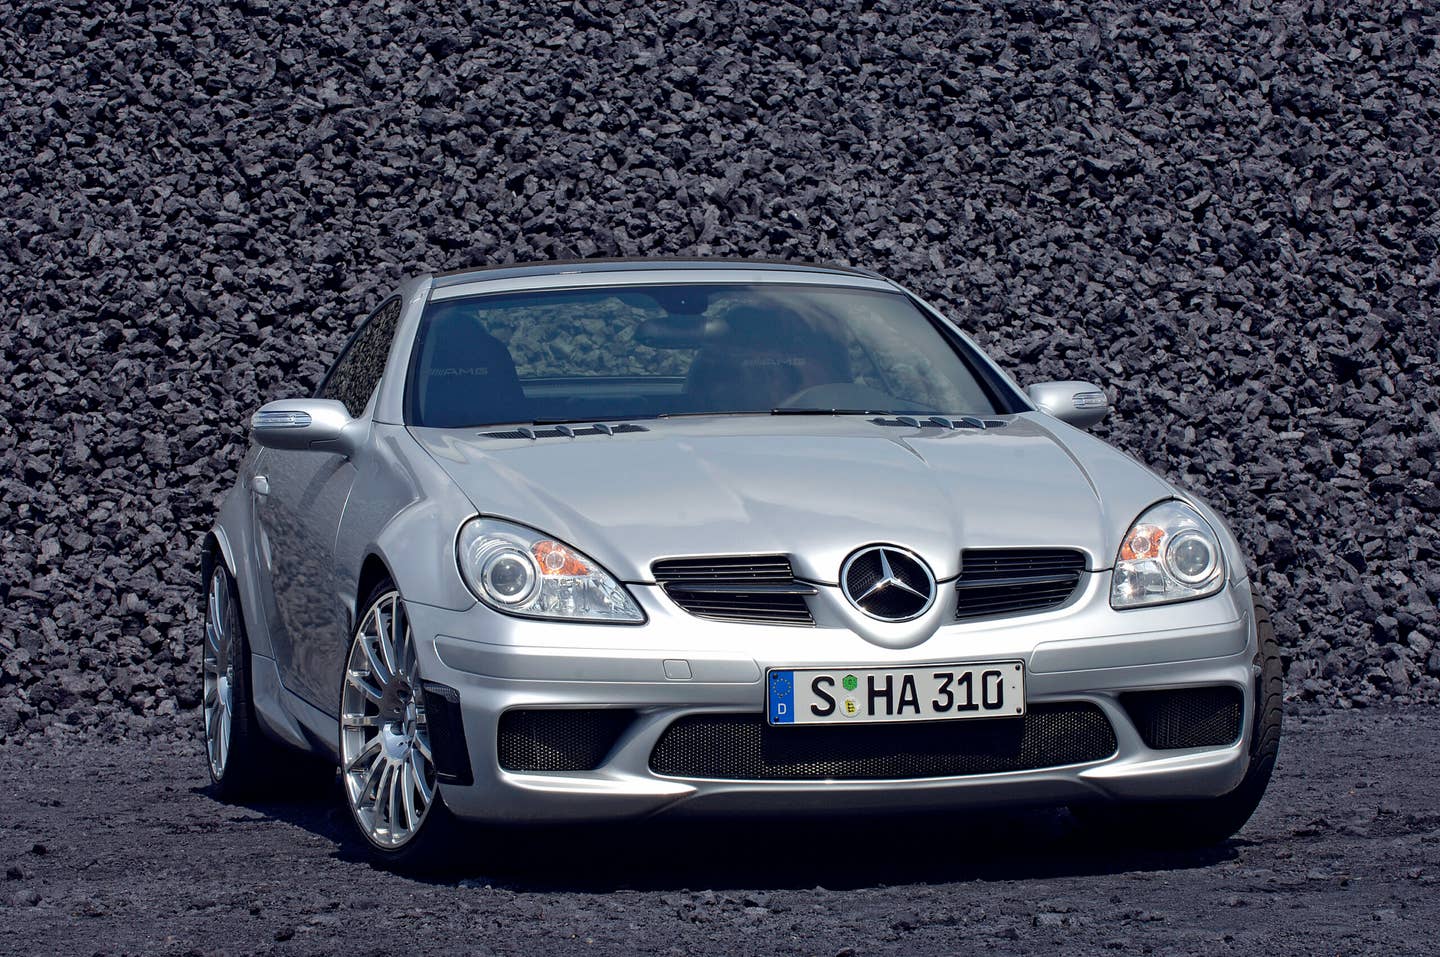 Mercedes-Benz SLK 55 AMG Black Series: The perfect mix of performance, handling and lightweight design